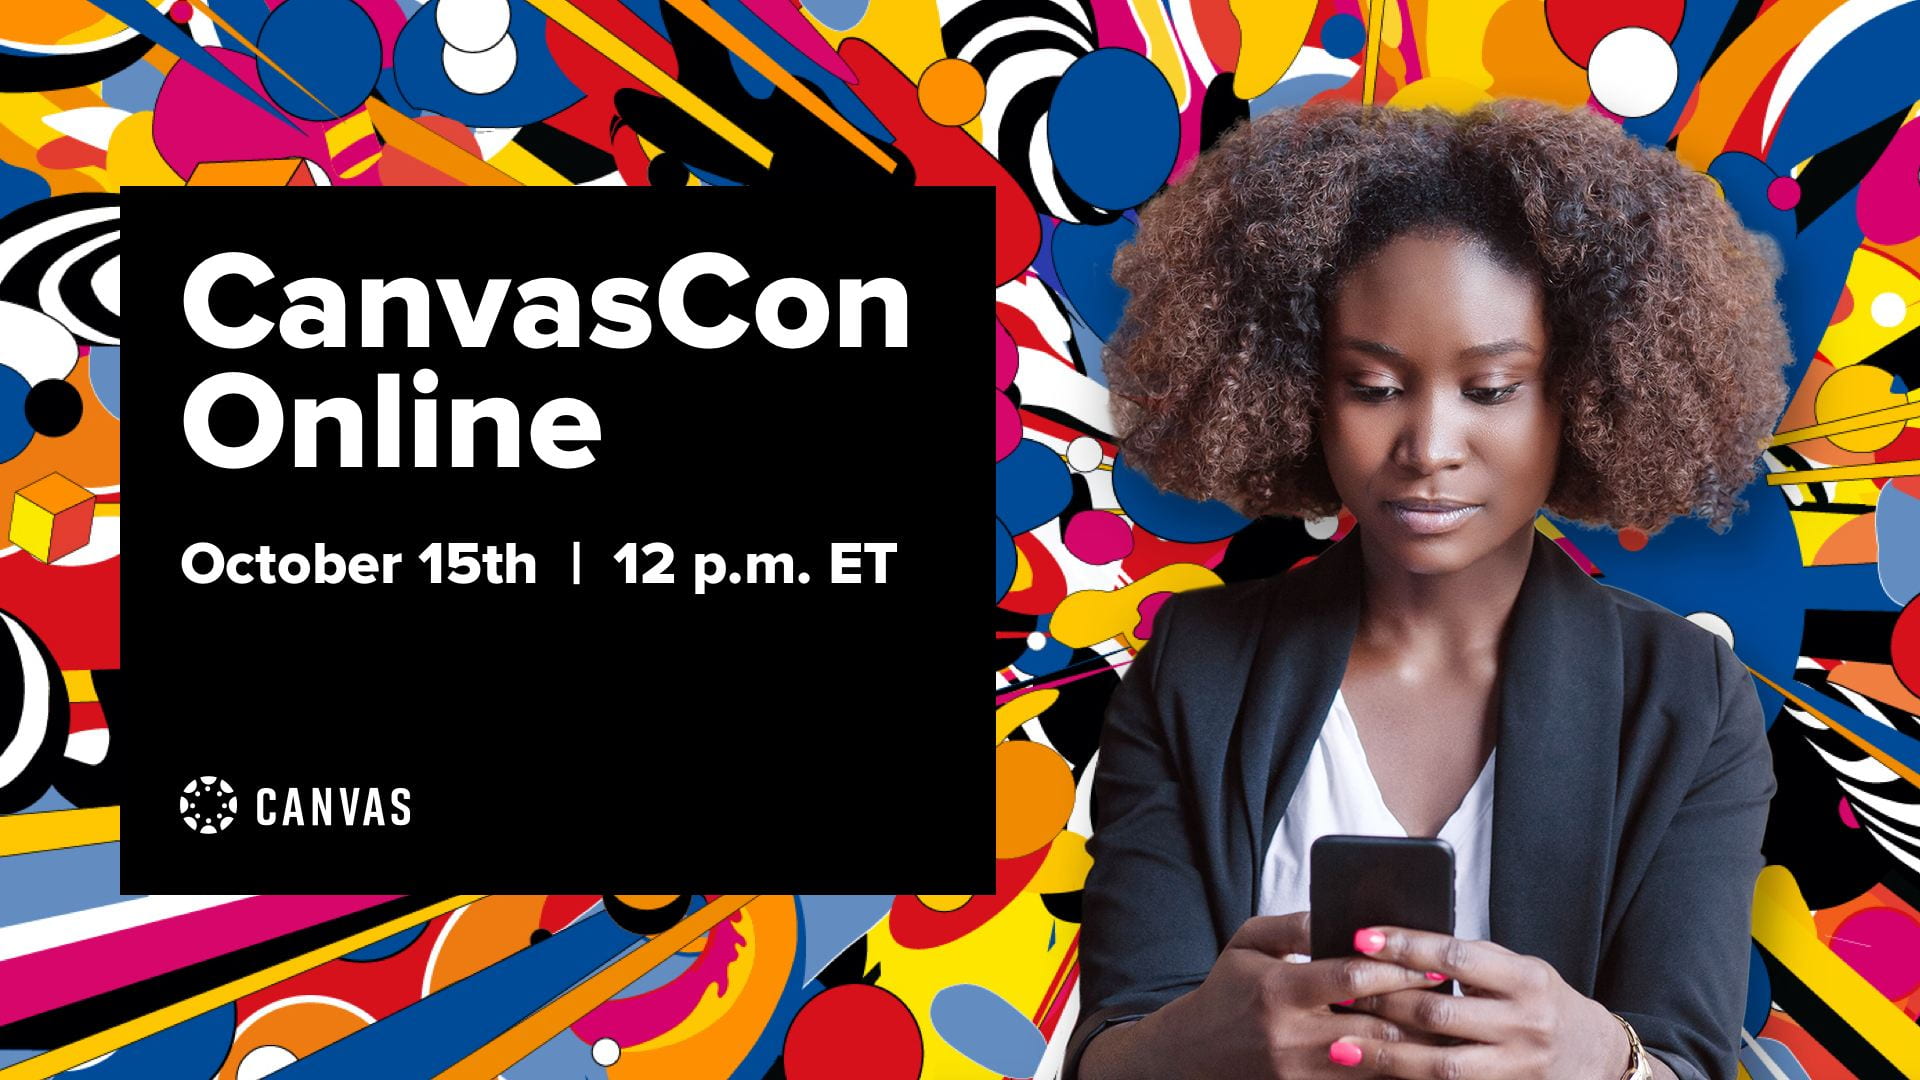 Banner showing CanvasCon, text on images says CanvasCon Online, October 15th at 12pm E.T